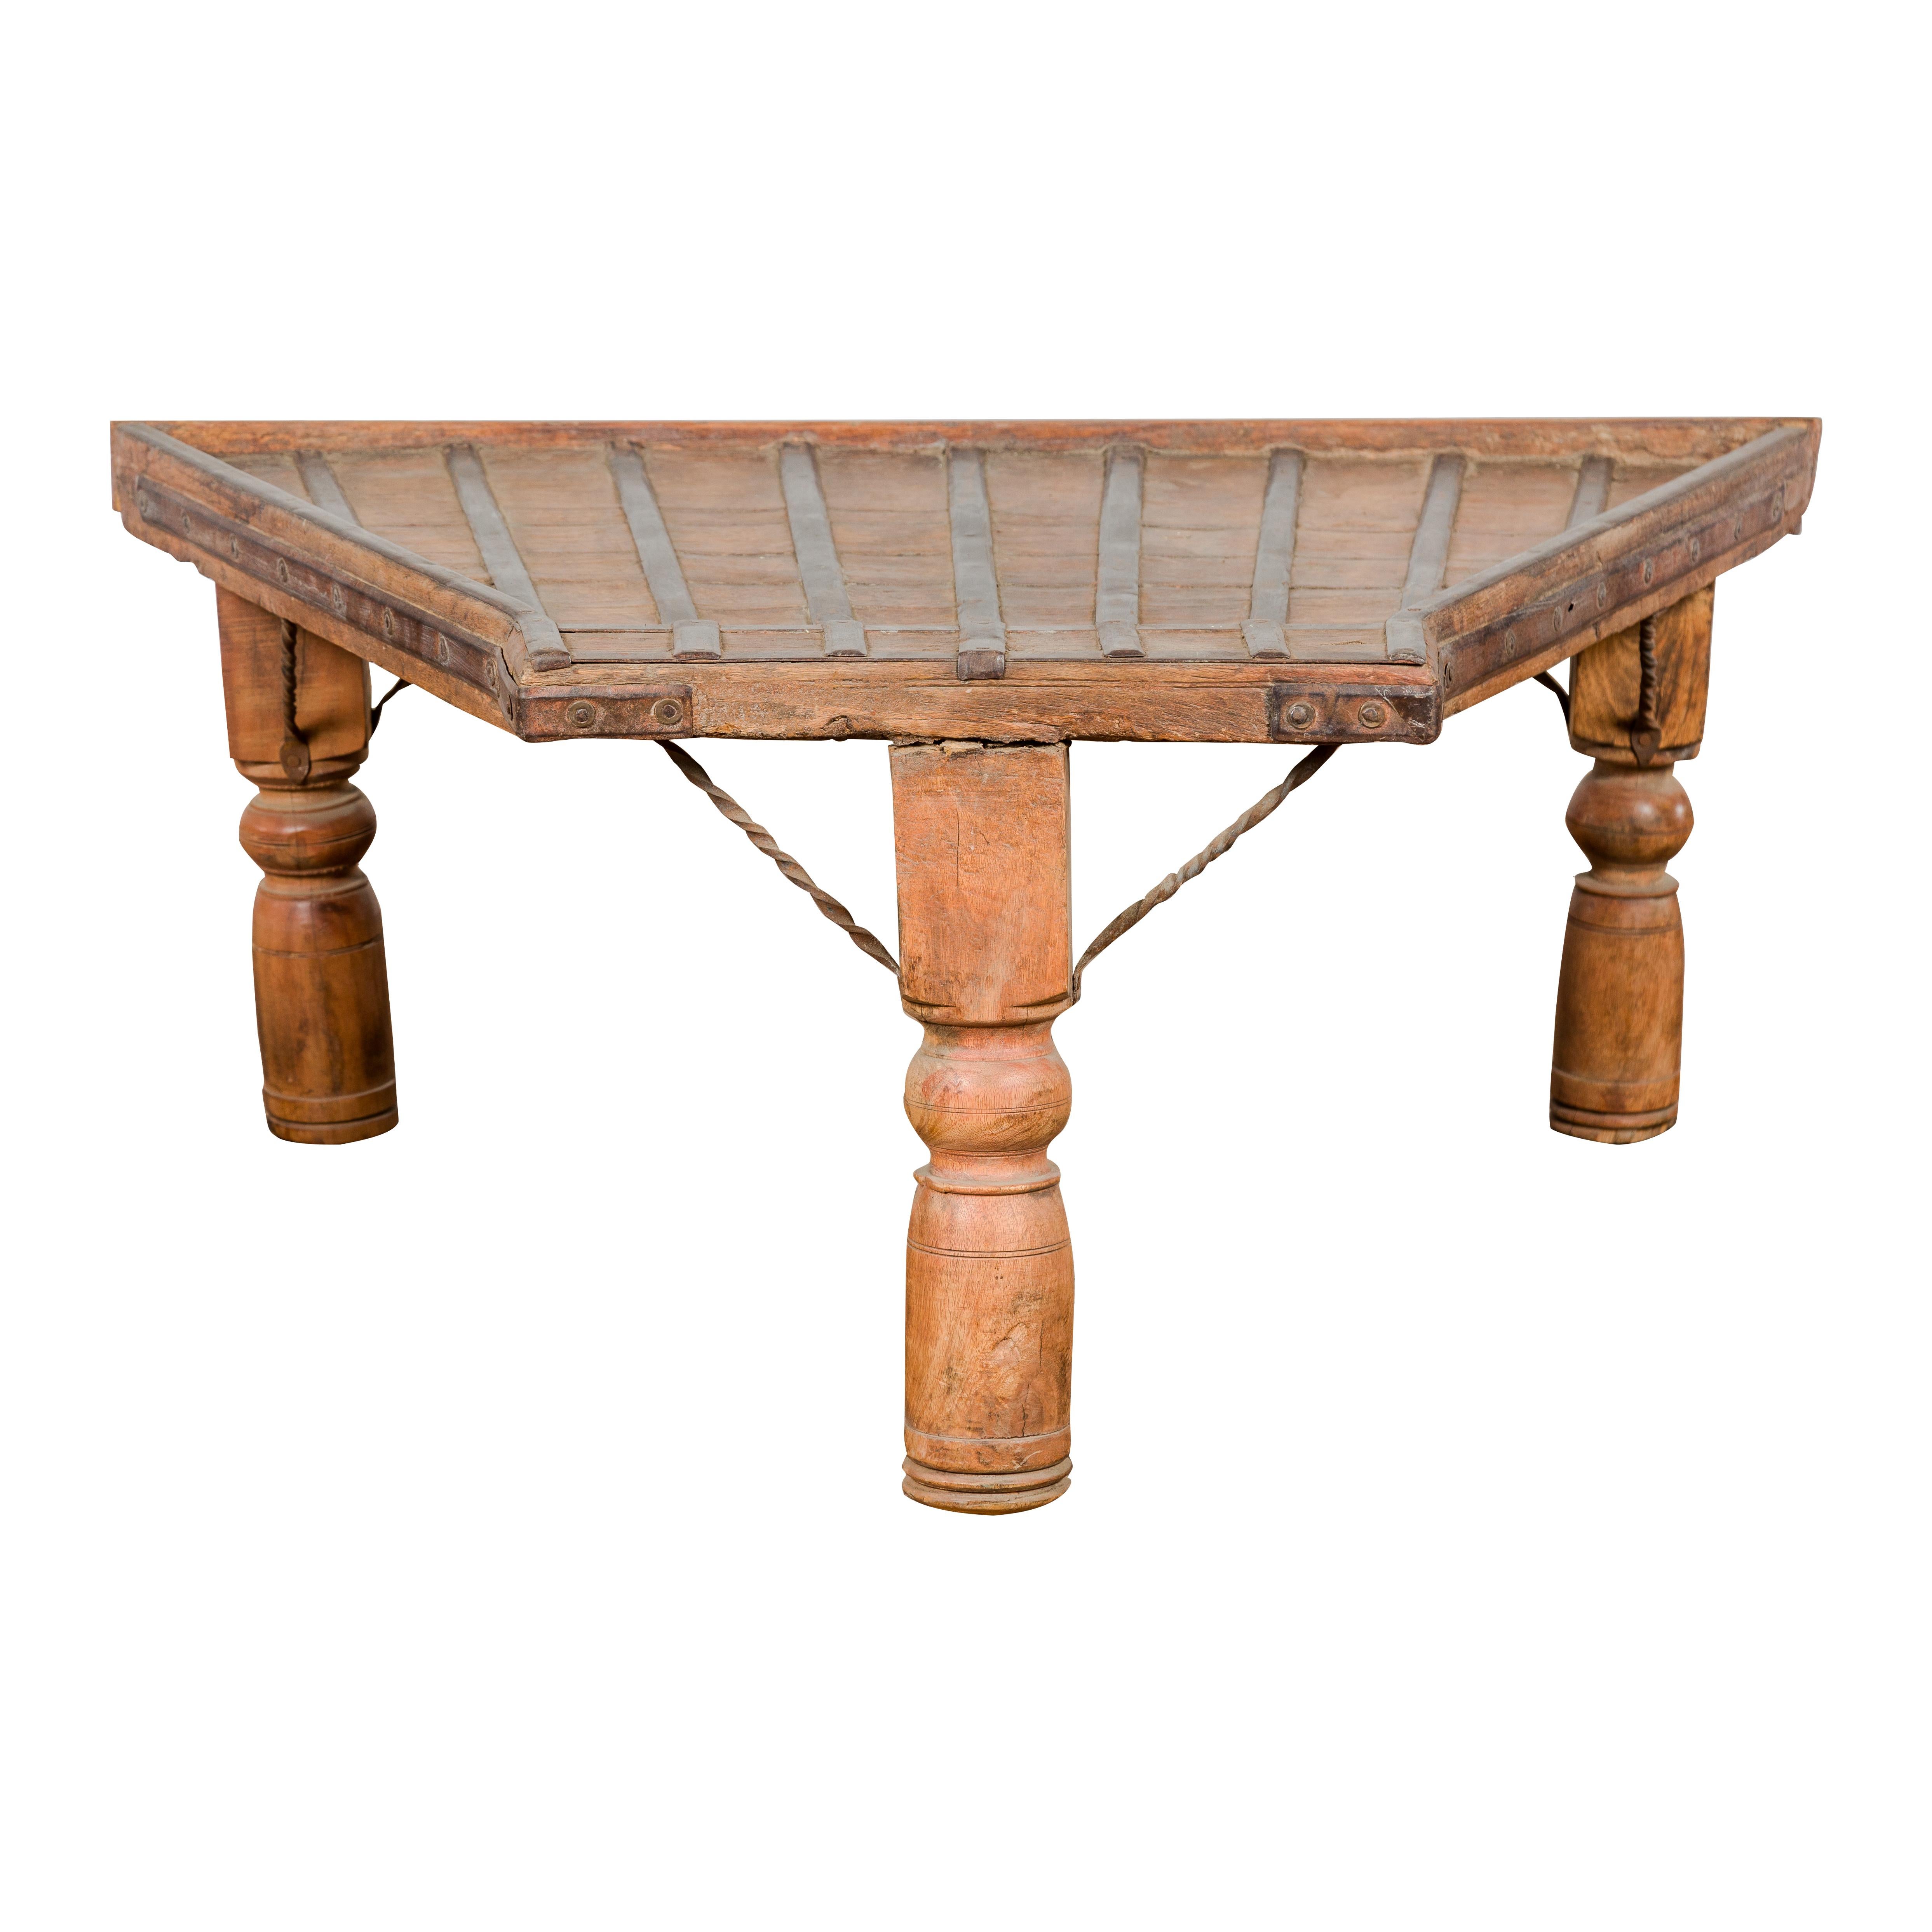 19th Century Bullock Cart Rustic Coffee Table with Twisted Iron Stretchers For Sale 13